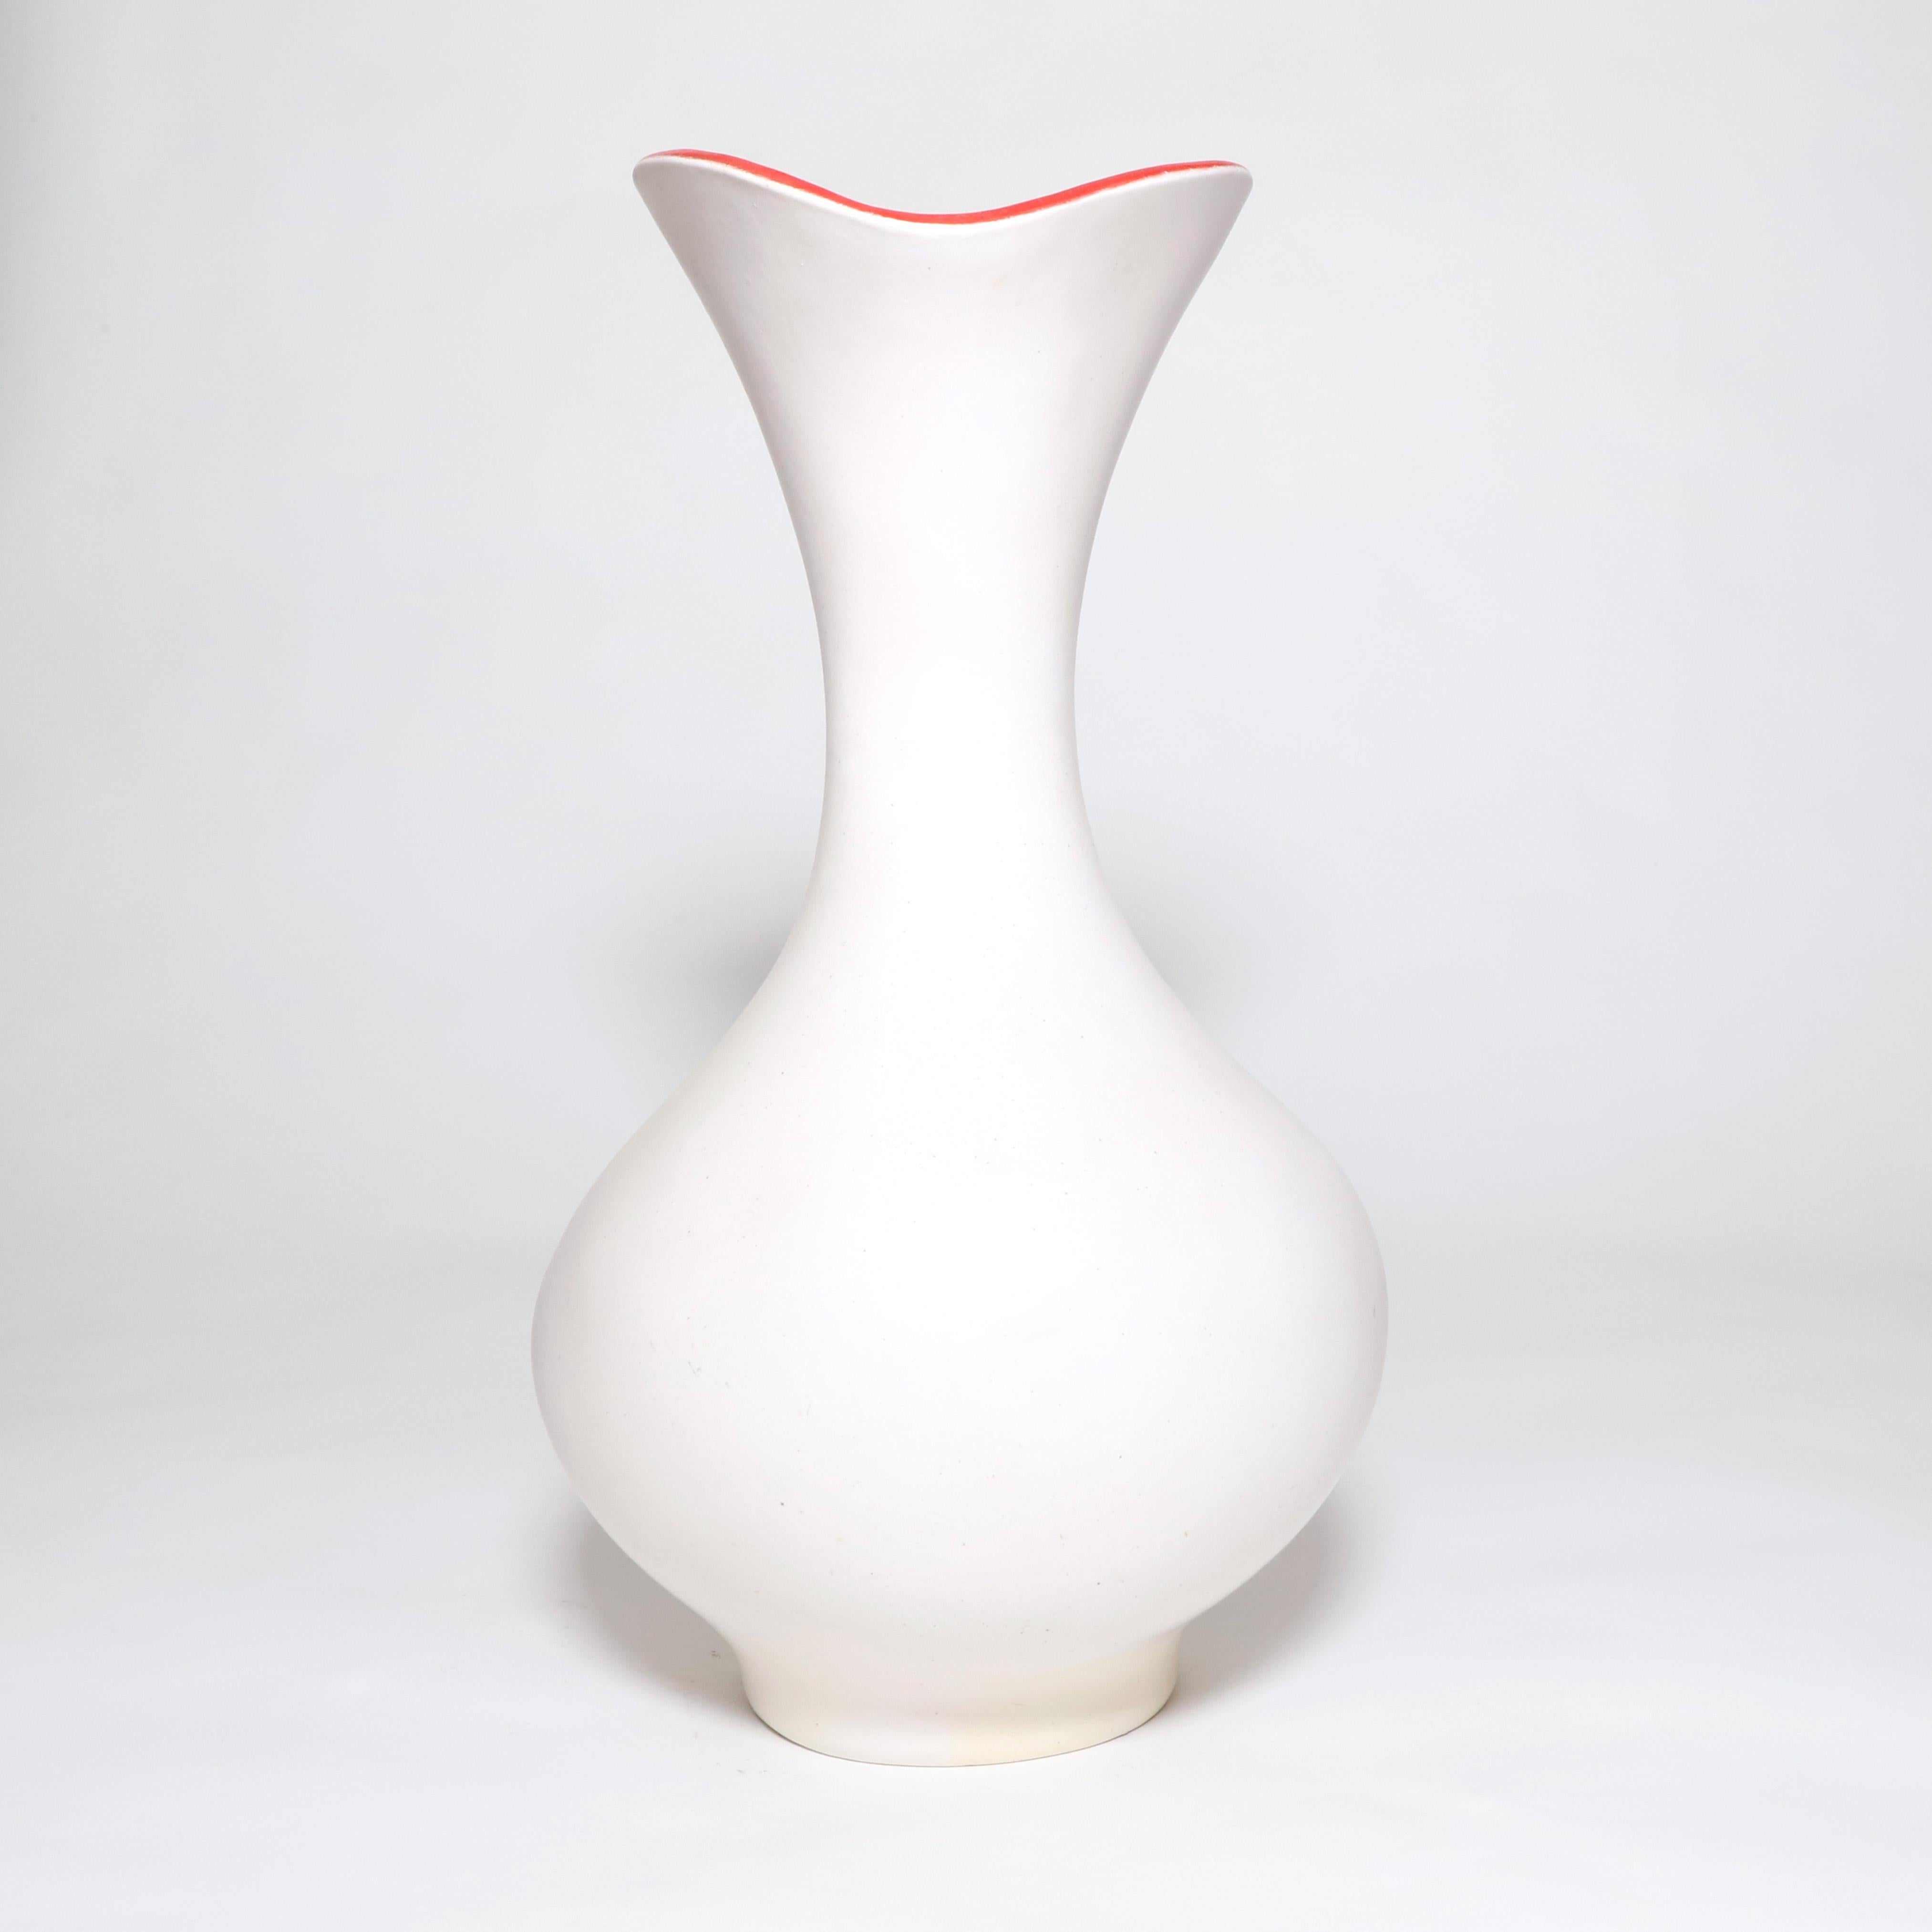 Mid-Century Modern 1956 894 Model Pol Chambost Ceramic Pitcher with Red Interior Glaze, Signed For Sale